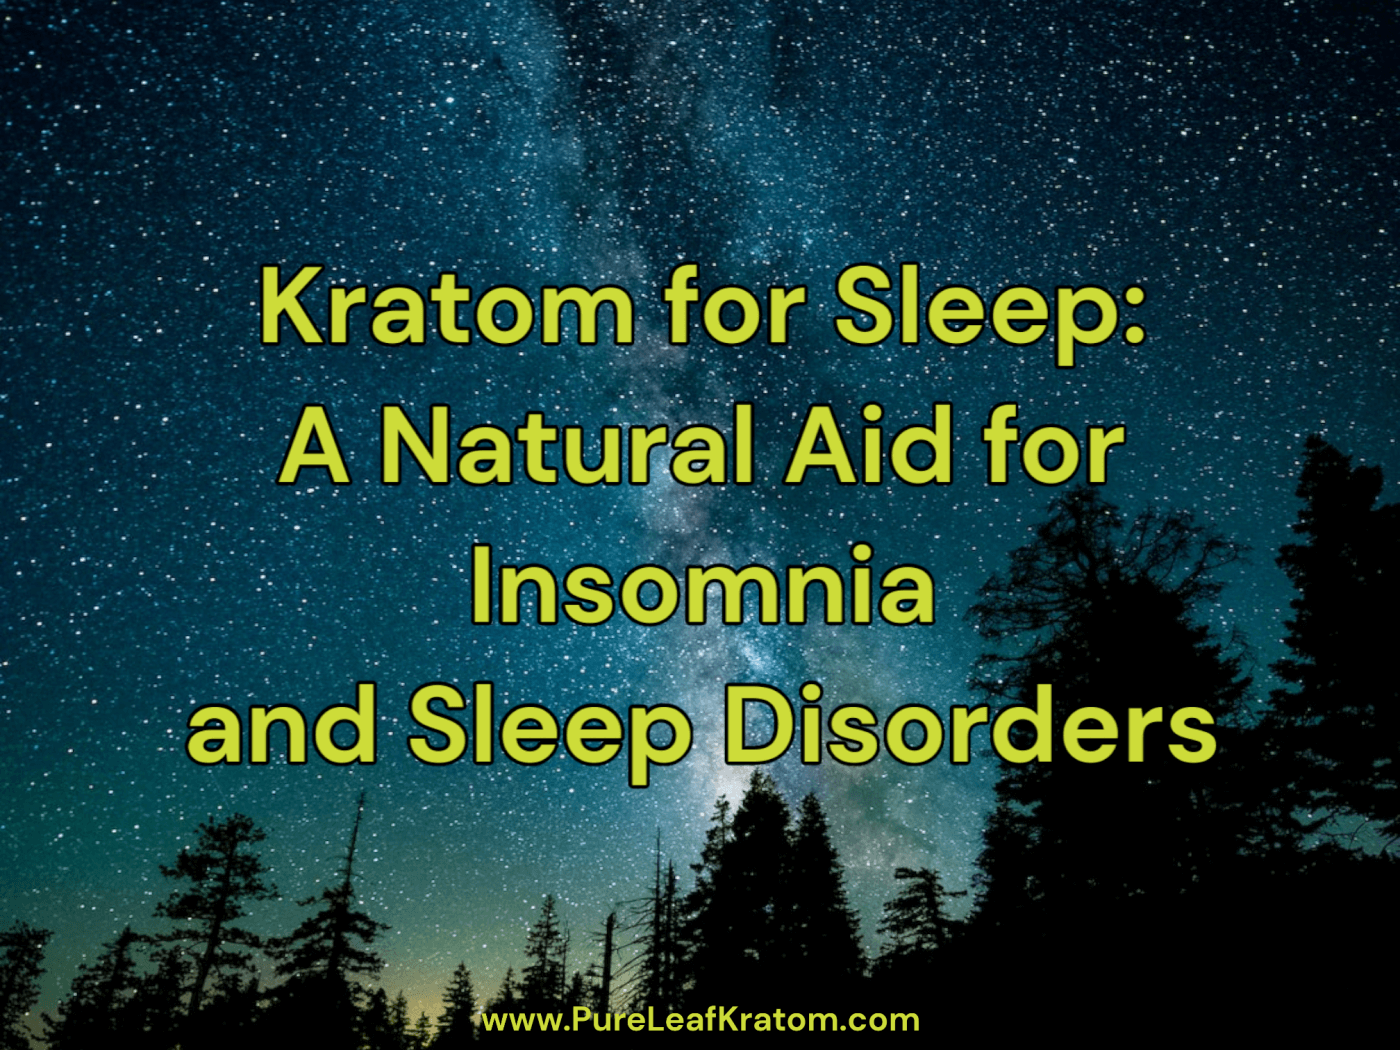 Kratom for Sleep: A Natural Aid for Insomnia and Sleep Disorders